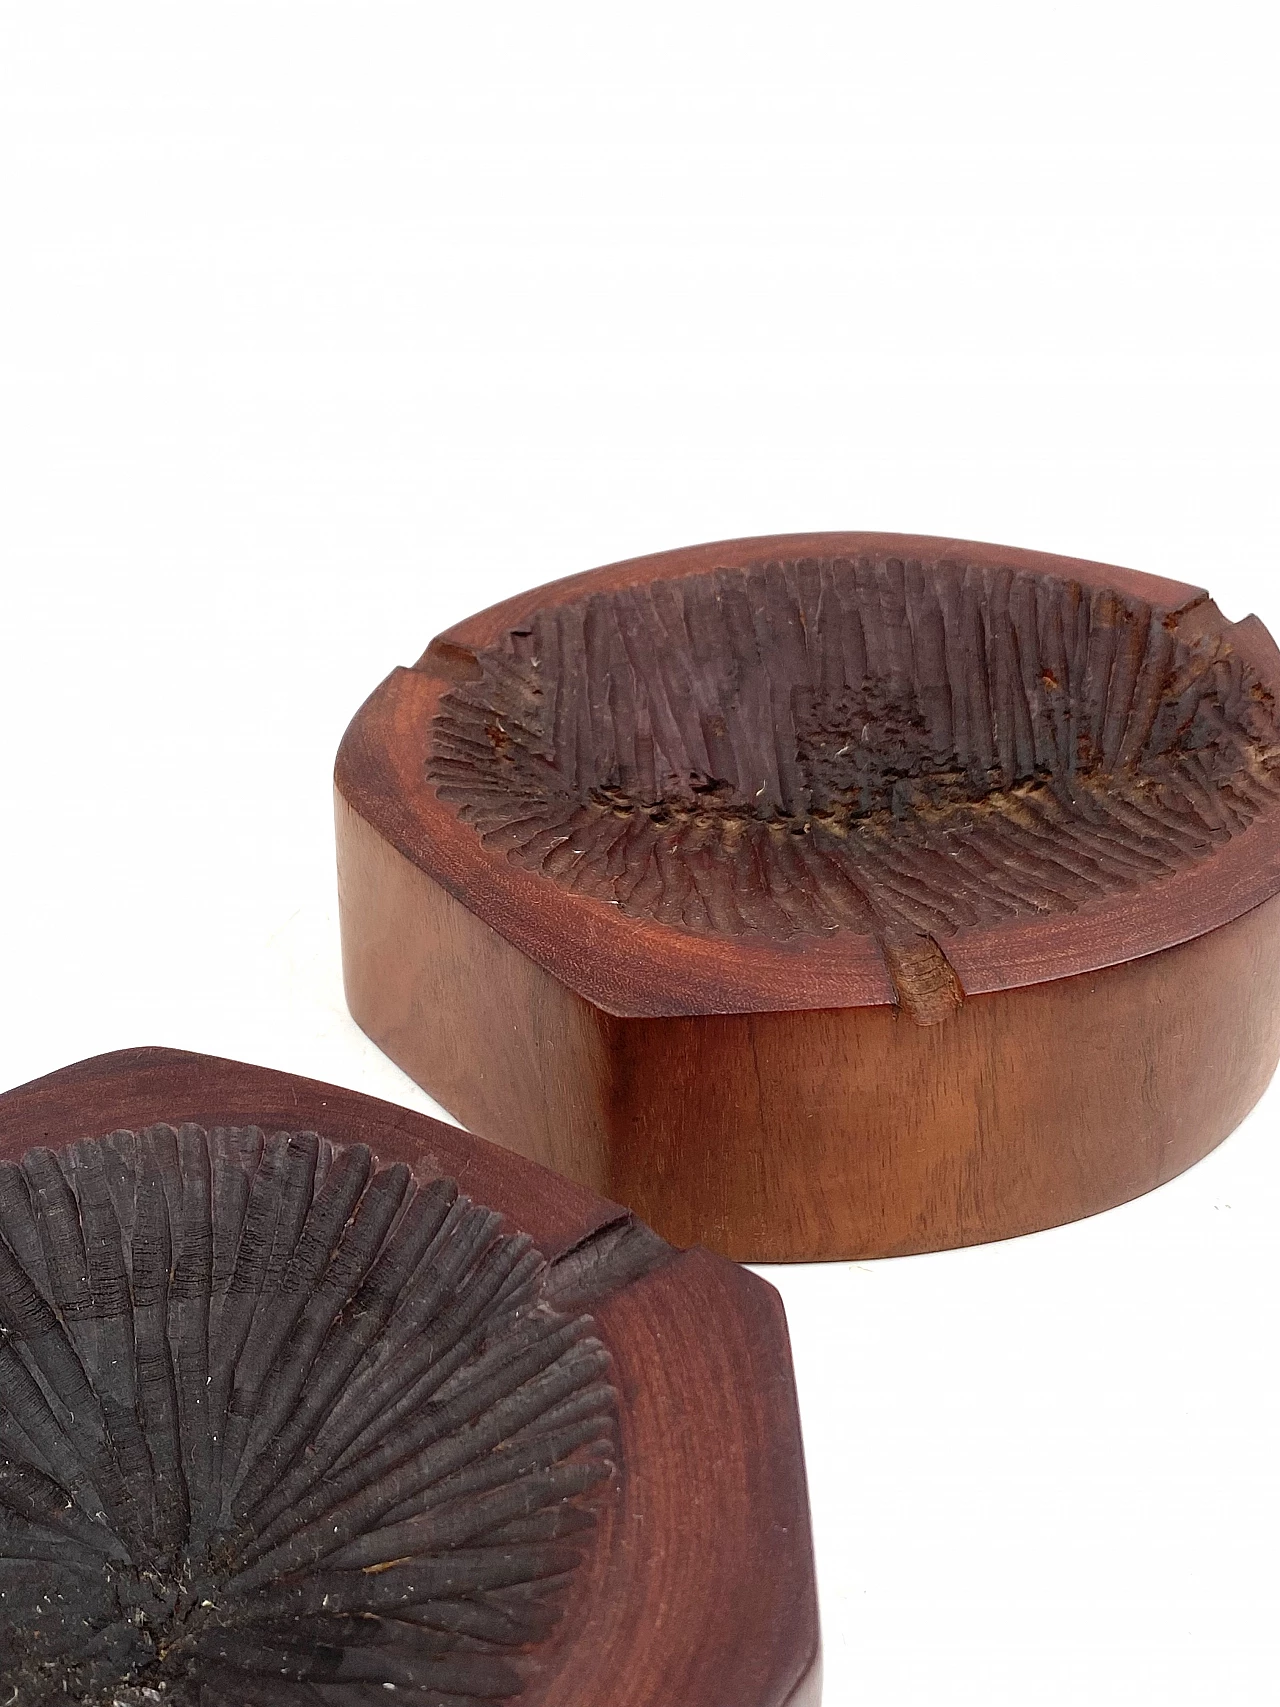 Pair of wooden ashtrays in Monique Gerber's style, 1970s 13